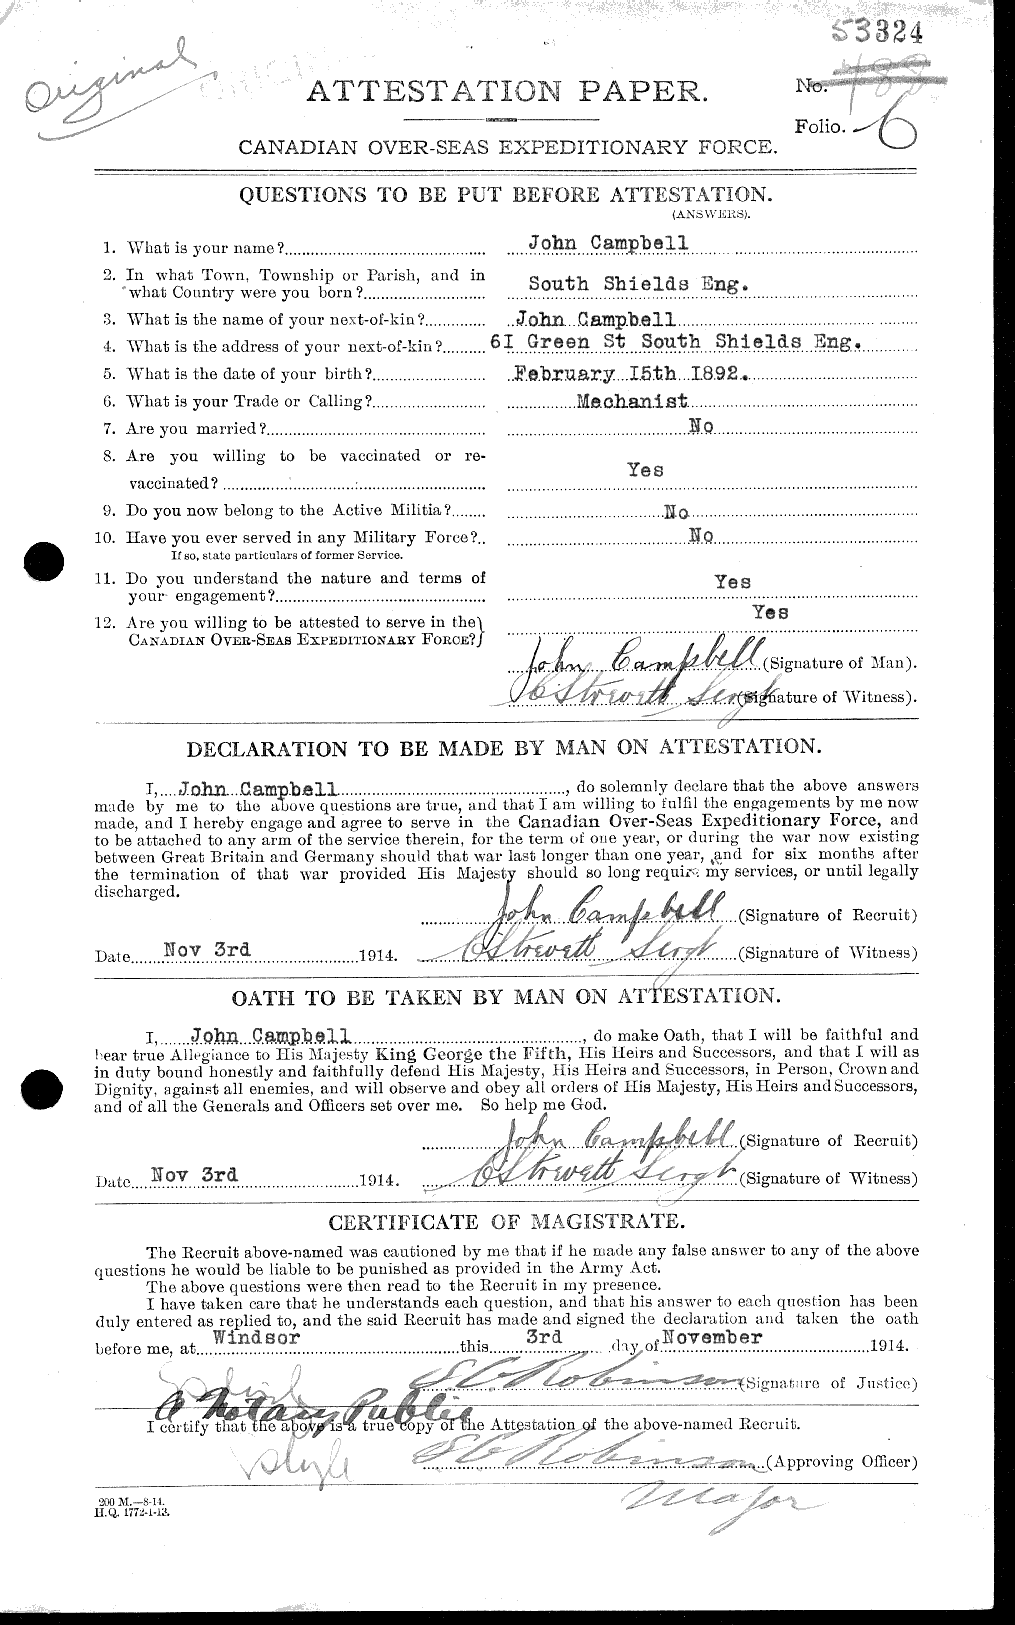 Personnel Records of the First World War - CEF 006801a